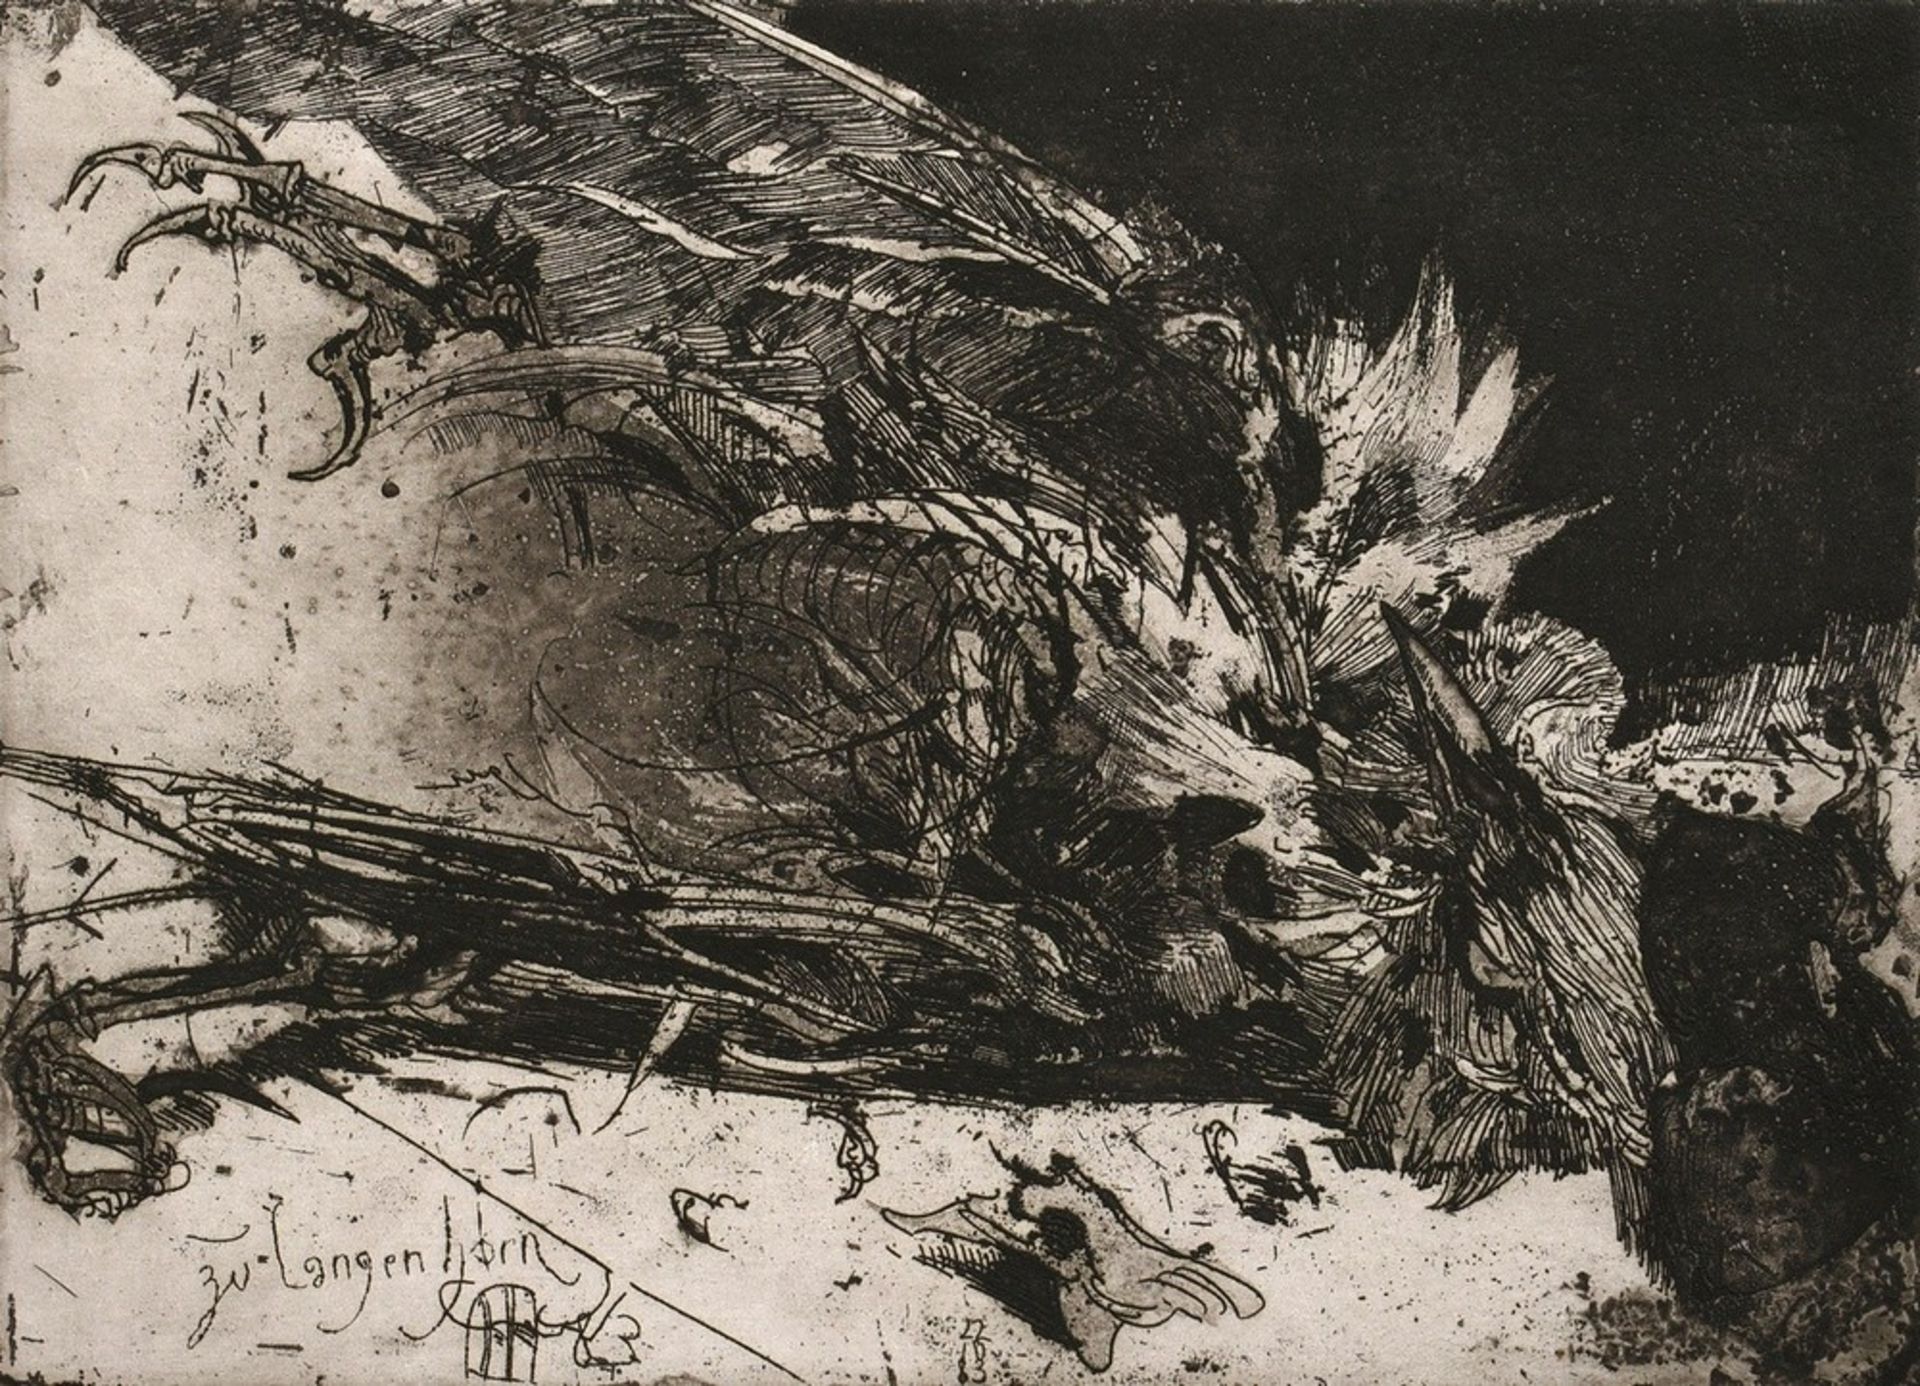 Janssen, Horst (1929-1995) "Crow" 1983, etching, Griffelkunst, sign. lower right, sign./dat./inscr.